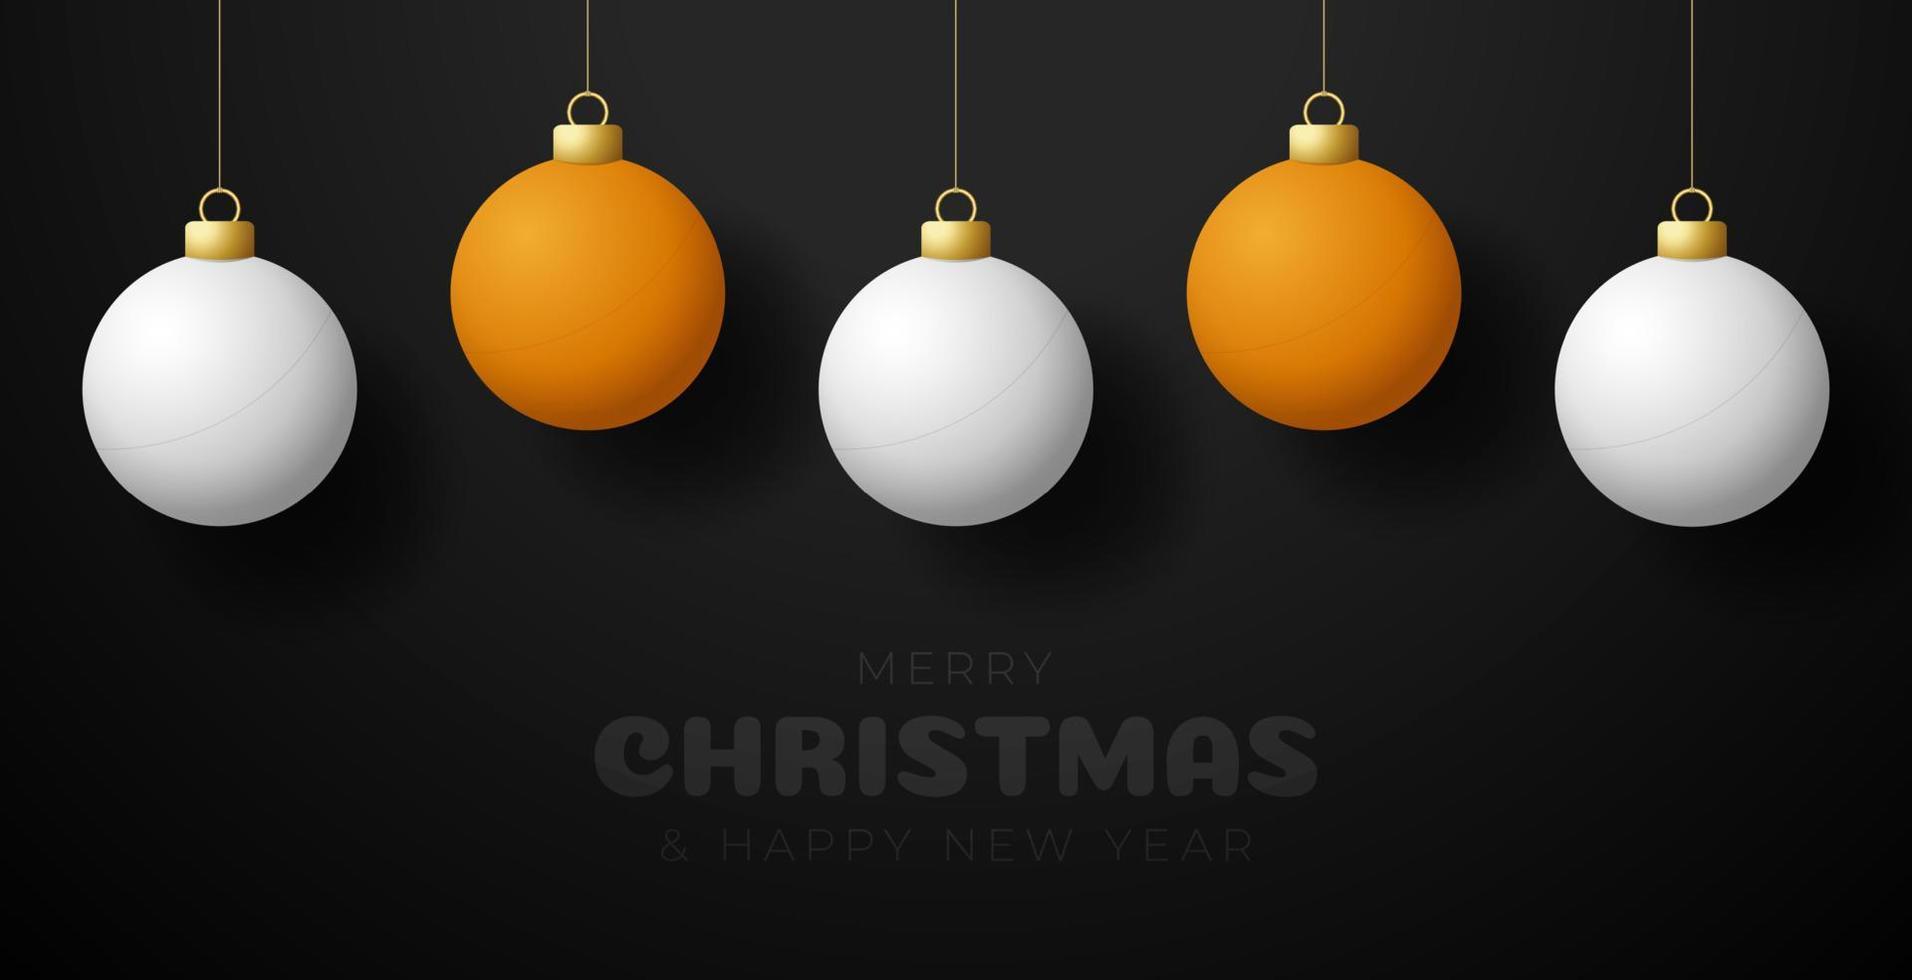 Ping pong christmas greeting card. Merry Christmas and Happy New Year Hang on a thread table tennis ball as a xmas ball. sport Vector illustration.